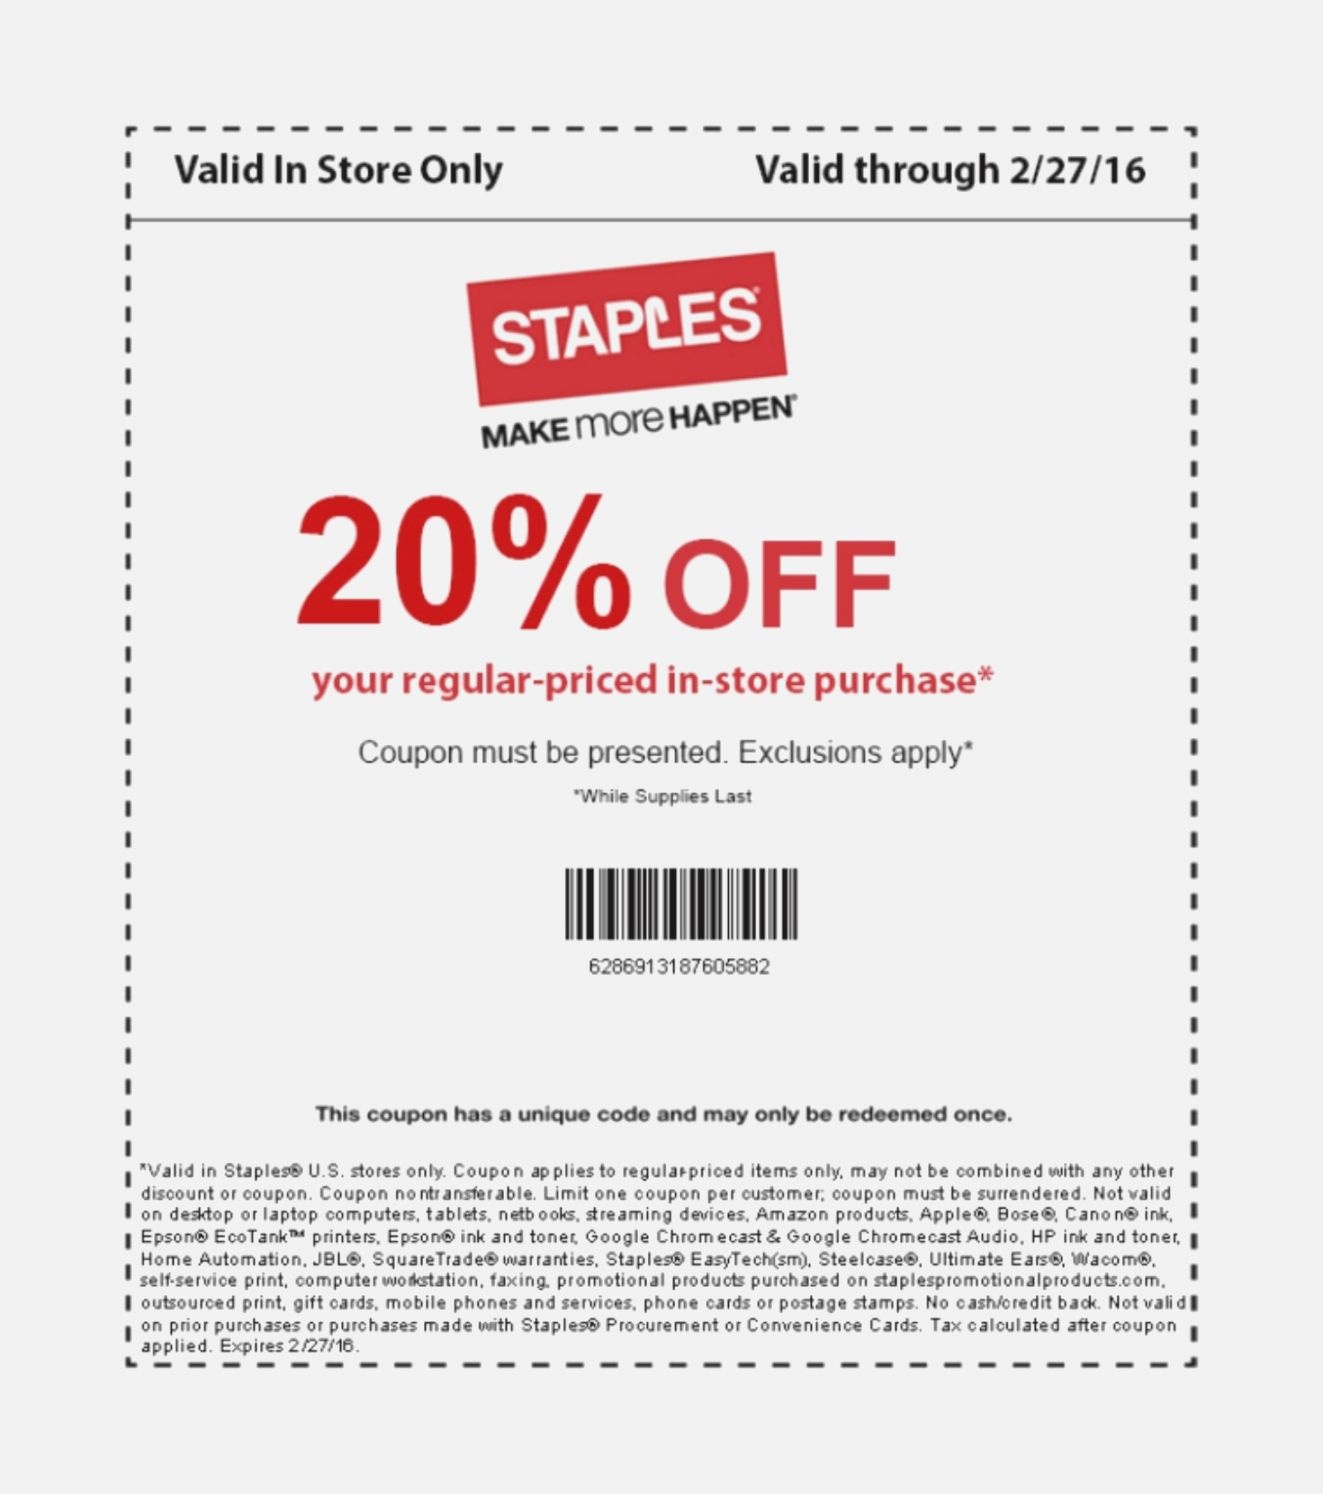 Adaptable Staples Printable Coupons | Jeettp - Free Printable American Eagle Coupons